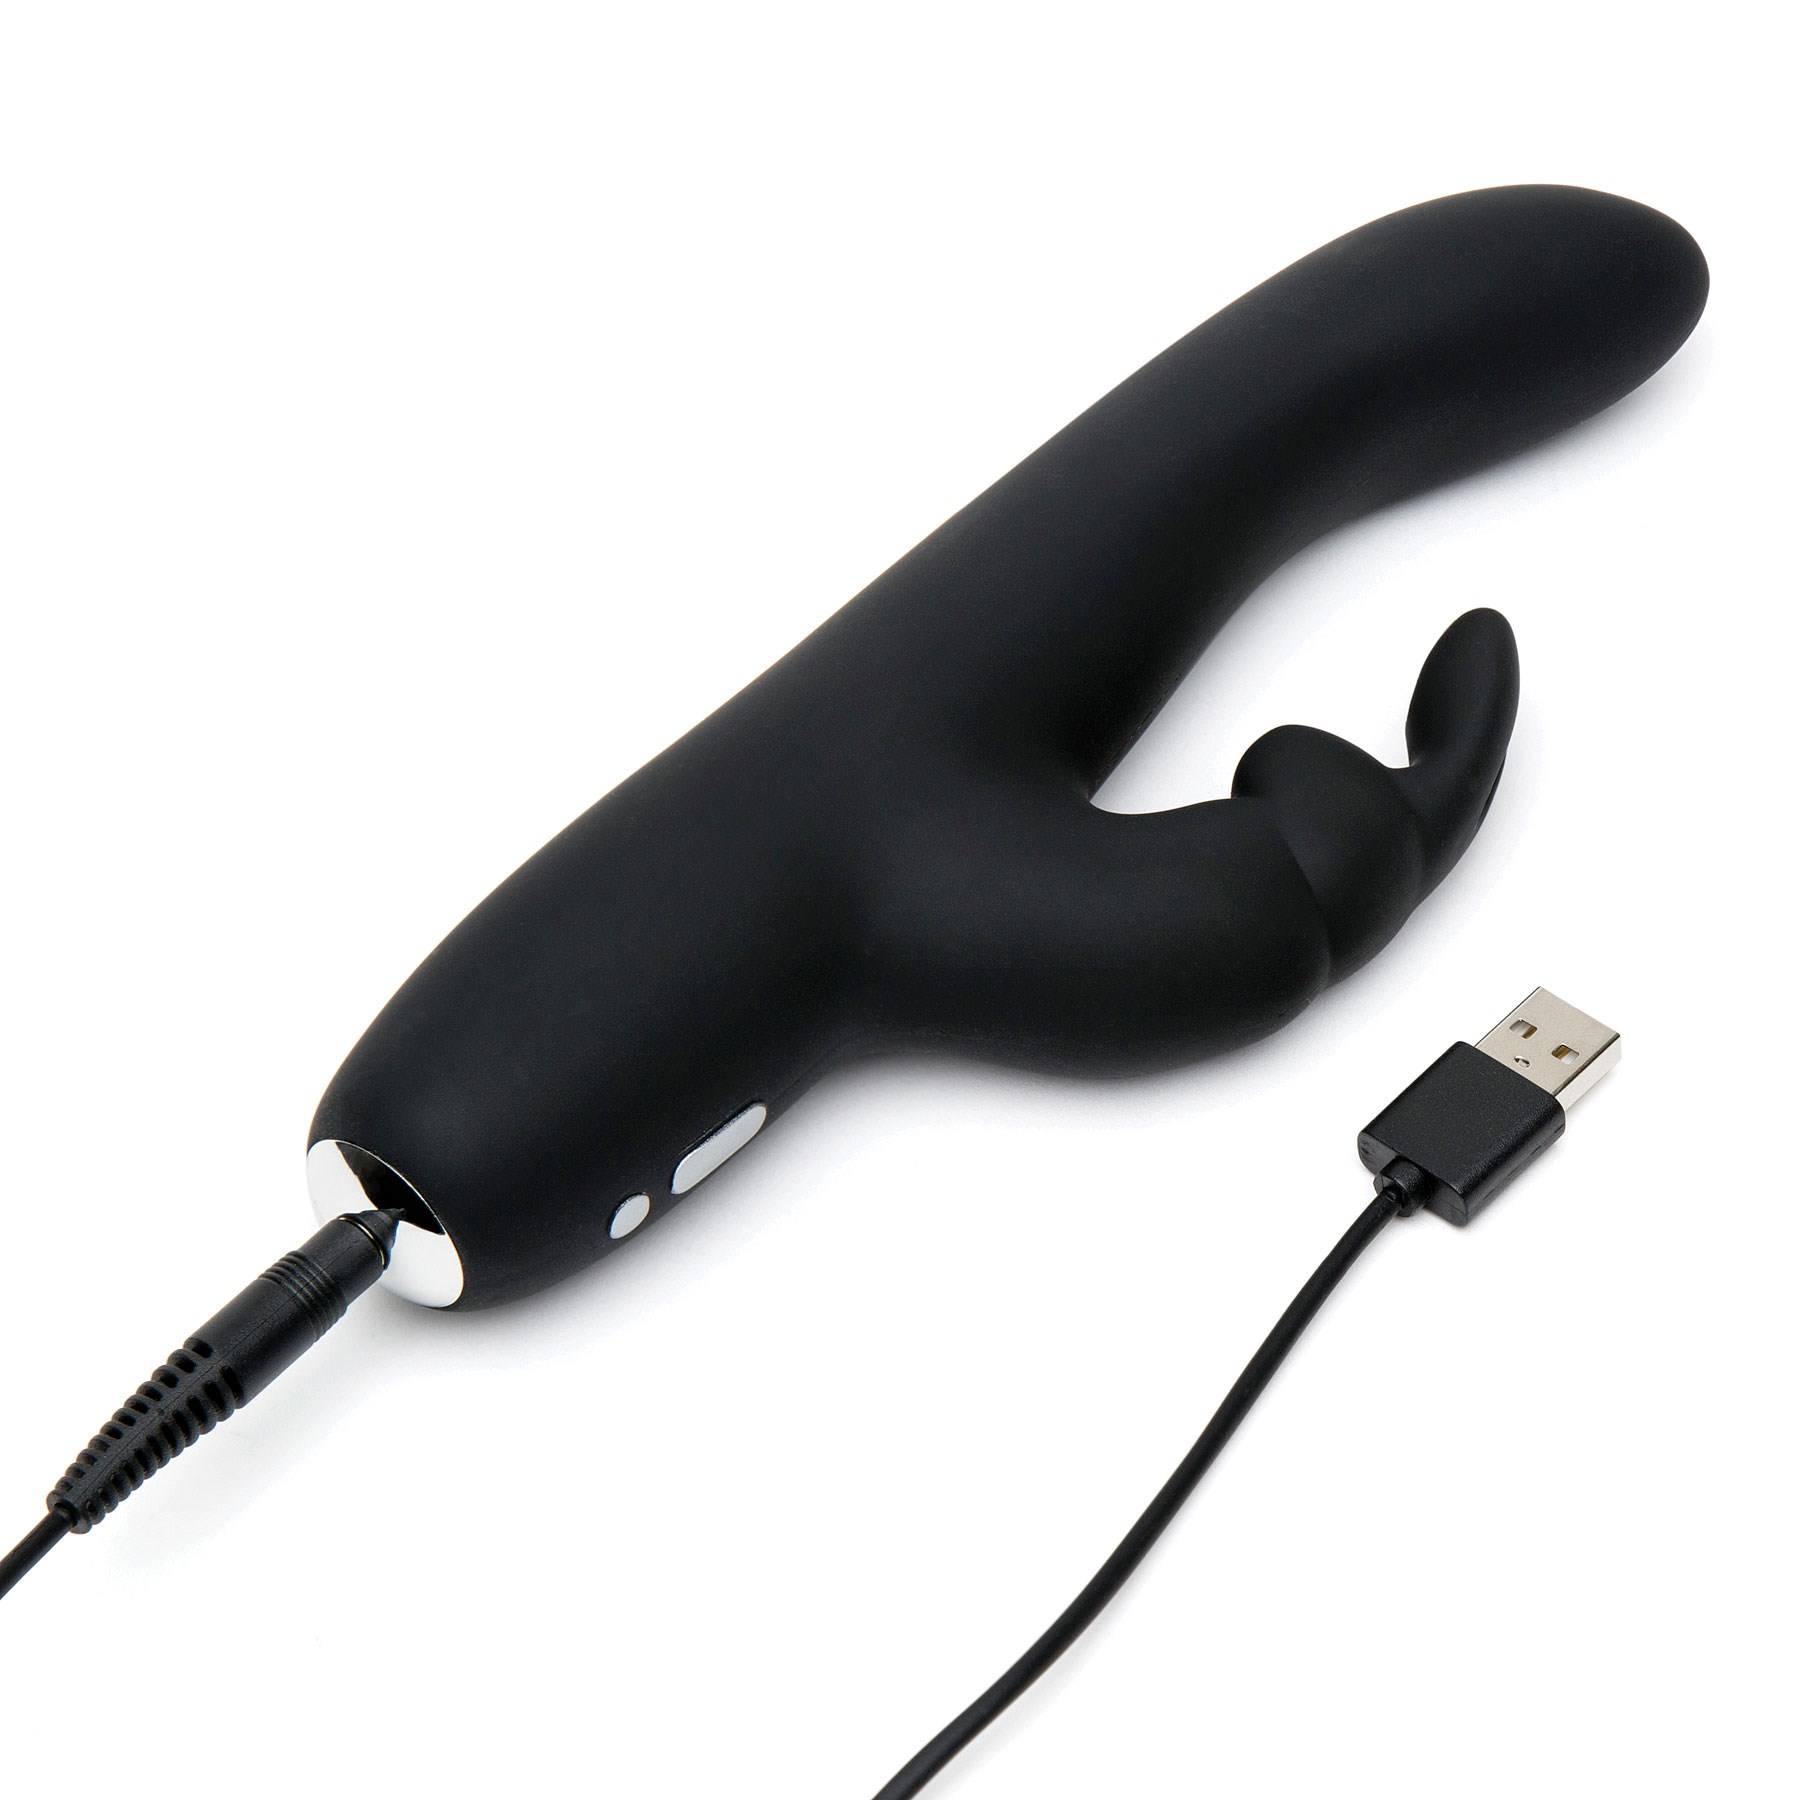 Fifty Shades Of Grey Slimline Rabbit Vibrator with charger